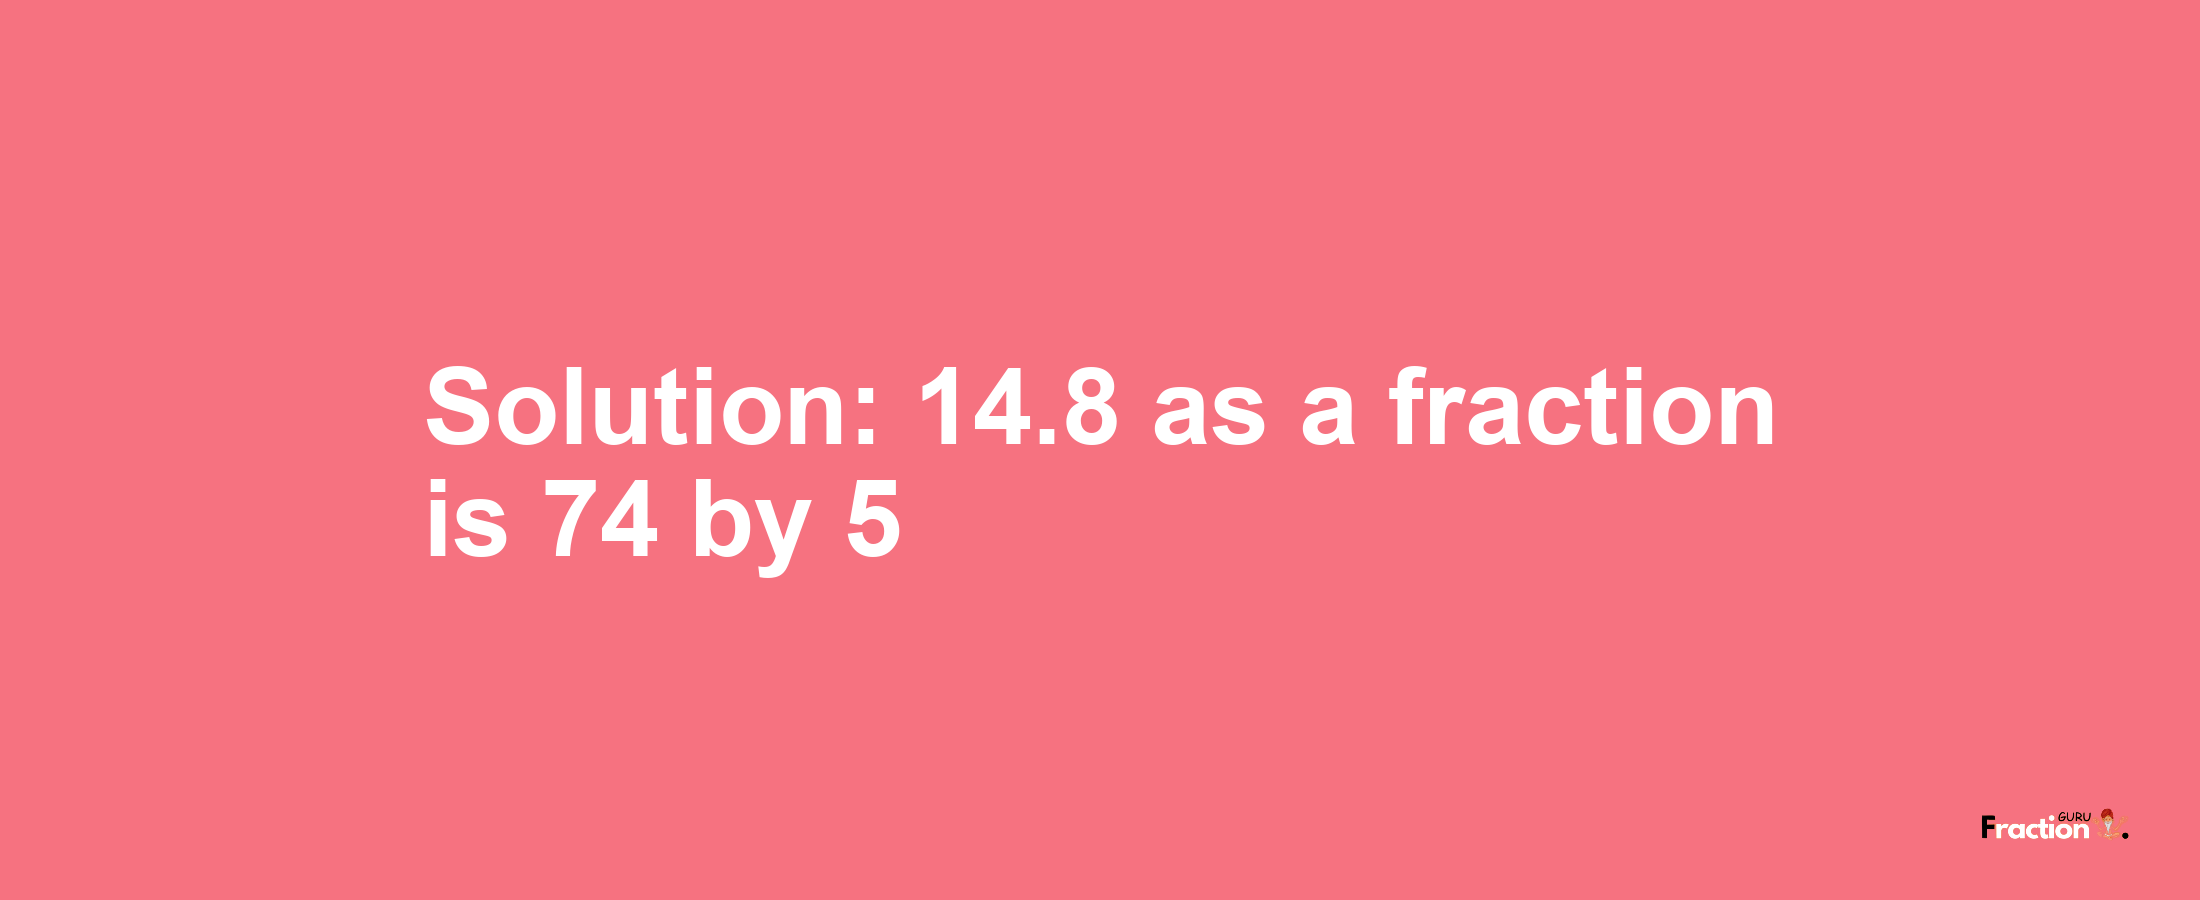 Solution:14.8 as a fraction is 74/5